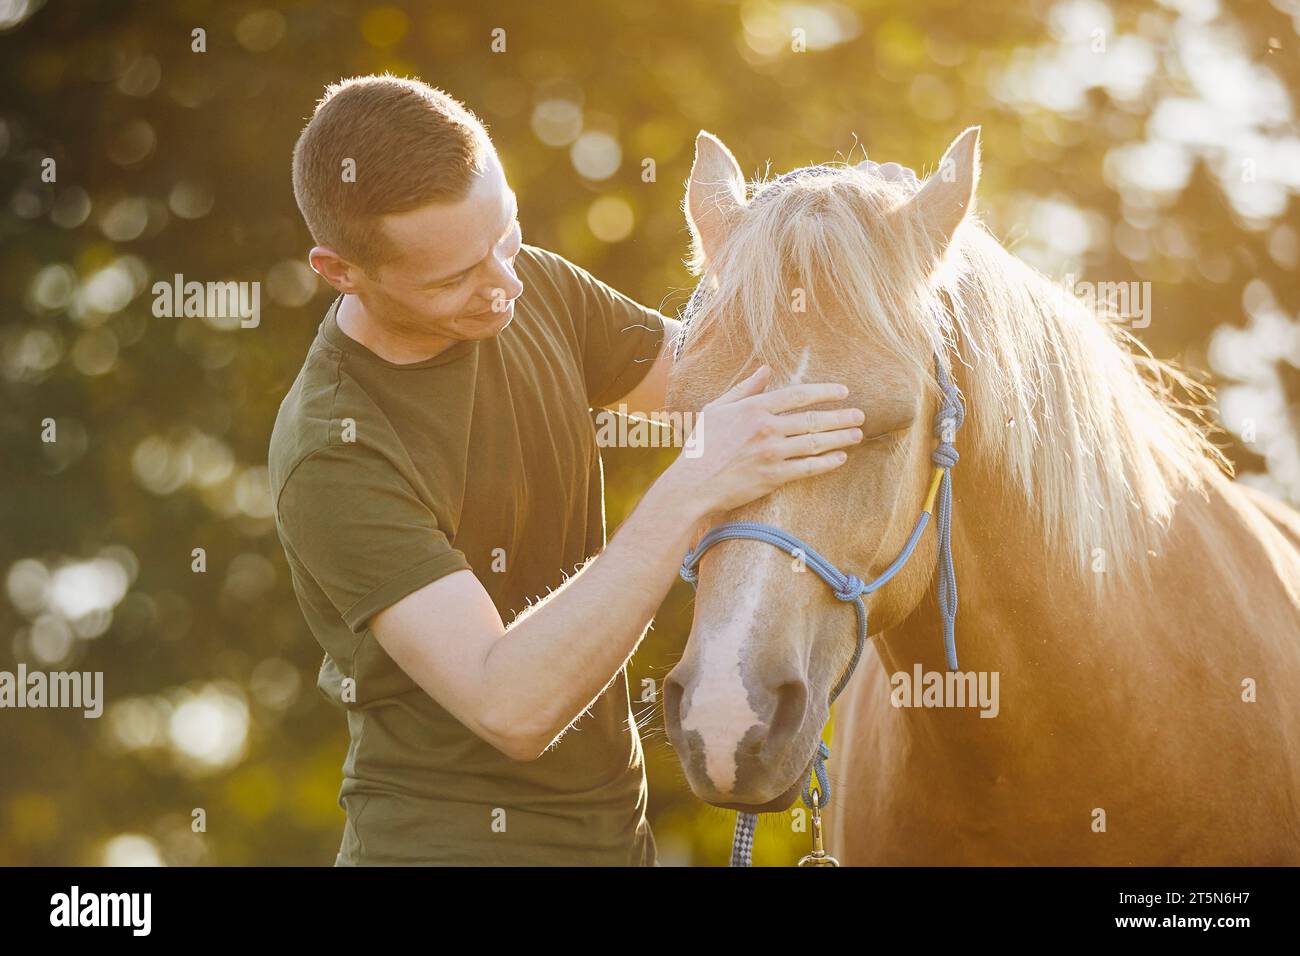 Man is embracing of therapy horse. Themes hippotherapy, care and friendship between people and animals. Stock Photo